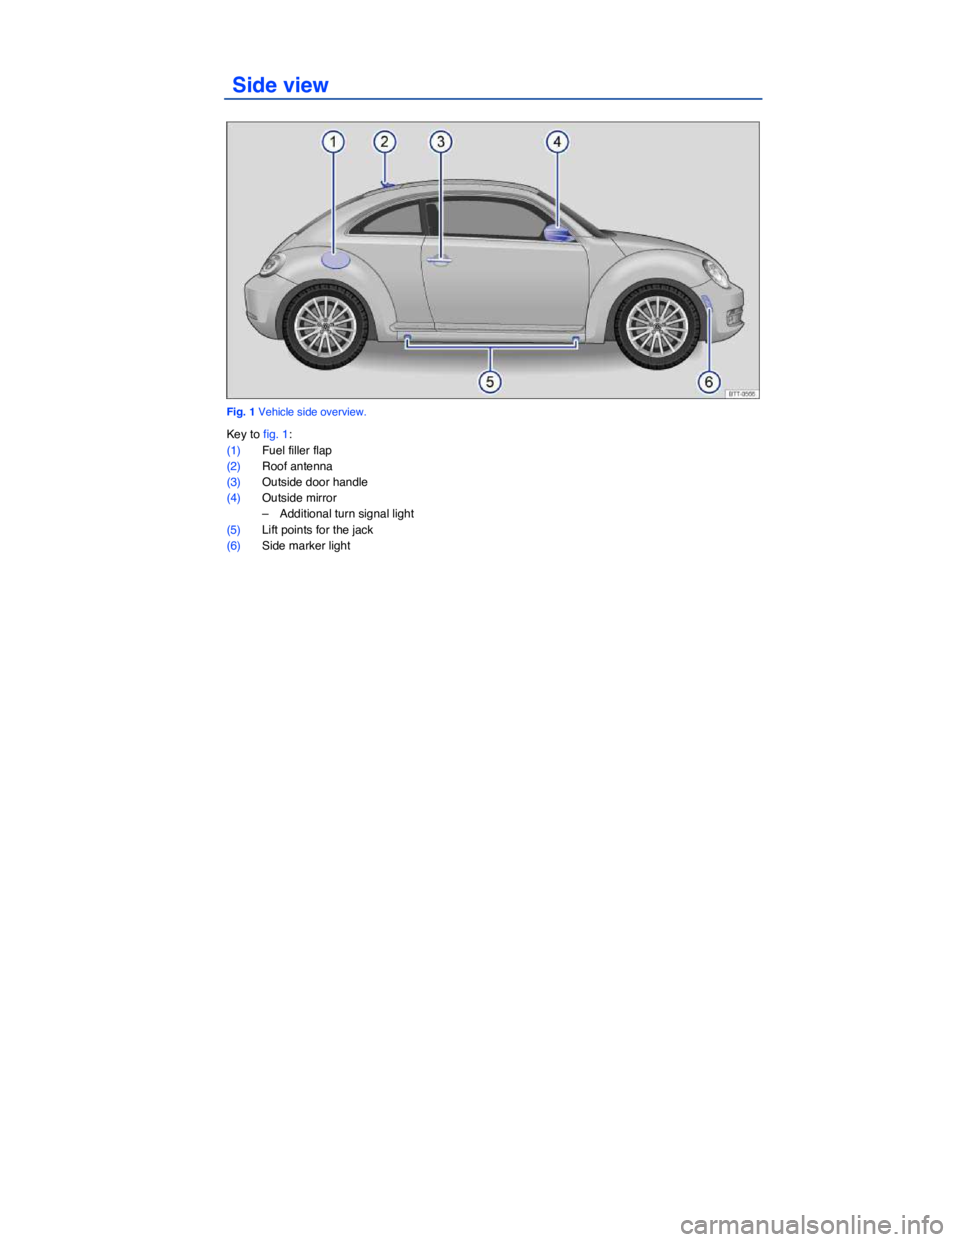 VOLKSWAGEN BEETLE 2019  Owners Manual  
 Side view 
 
Fig. 1 Vehicle side overview. 
Key to fig. 1: 
(1) Fuel filler flap  
(2) Roof antenna                                                                                                  